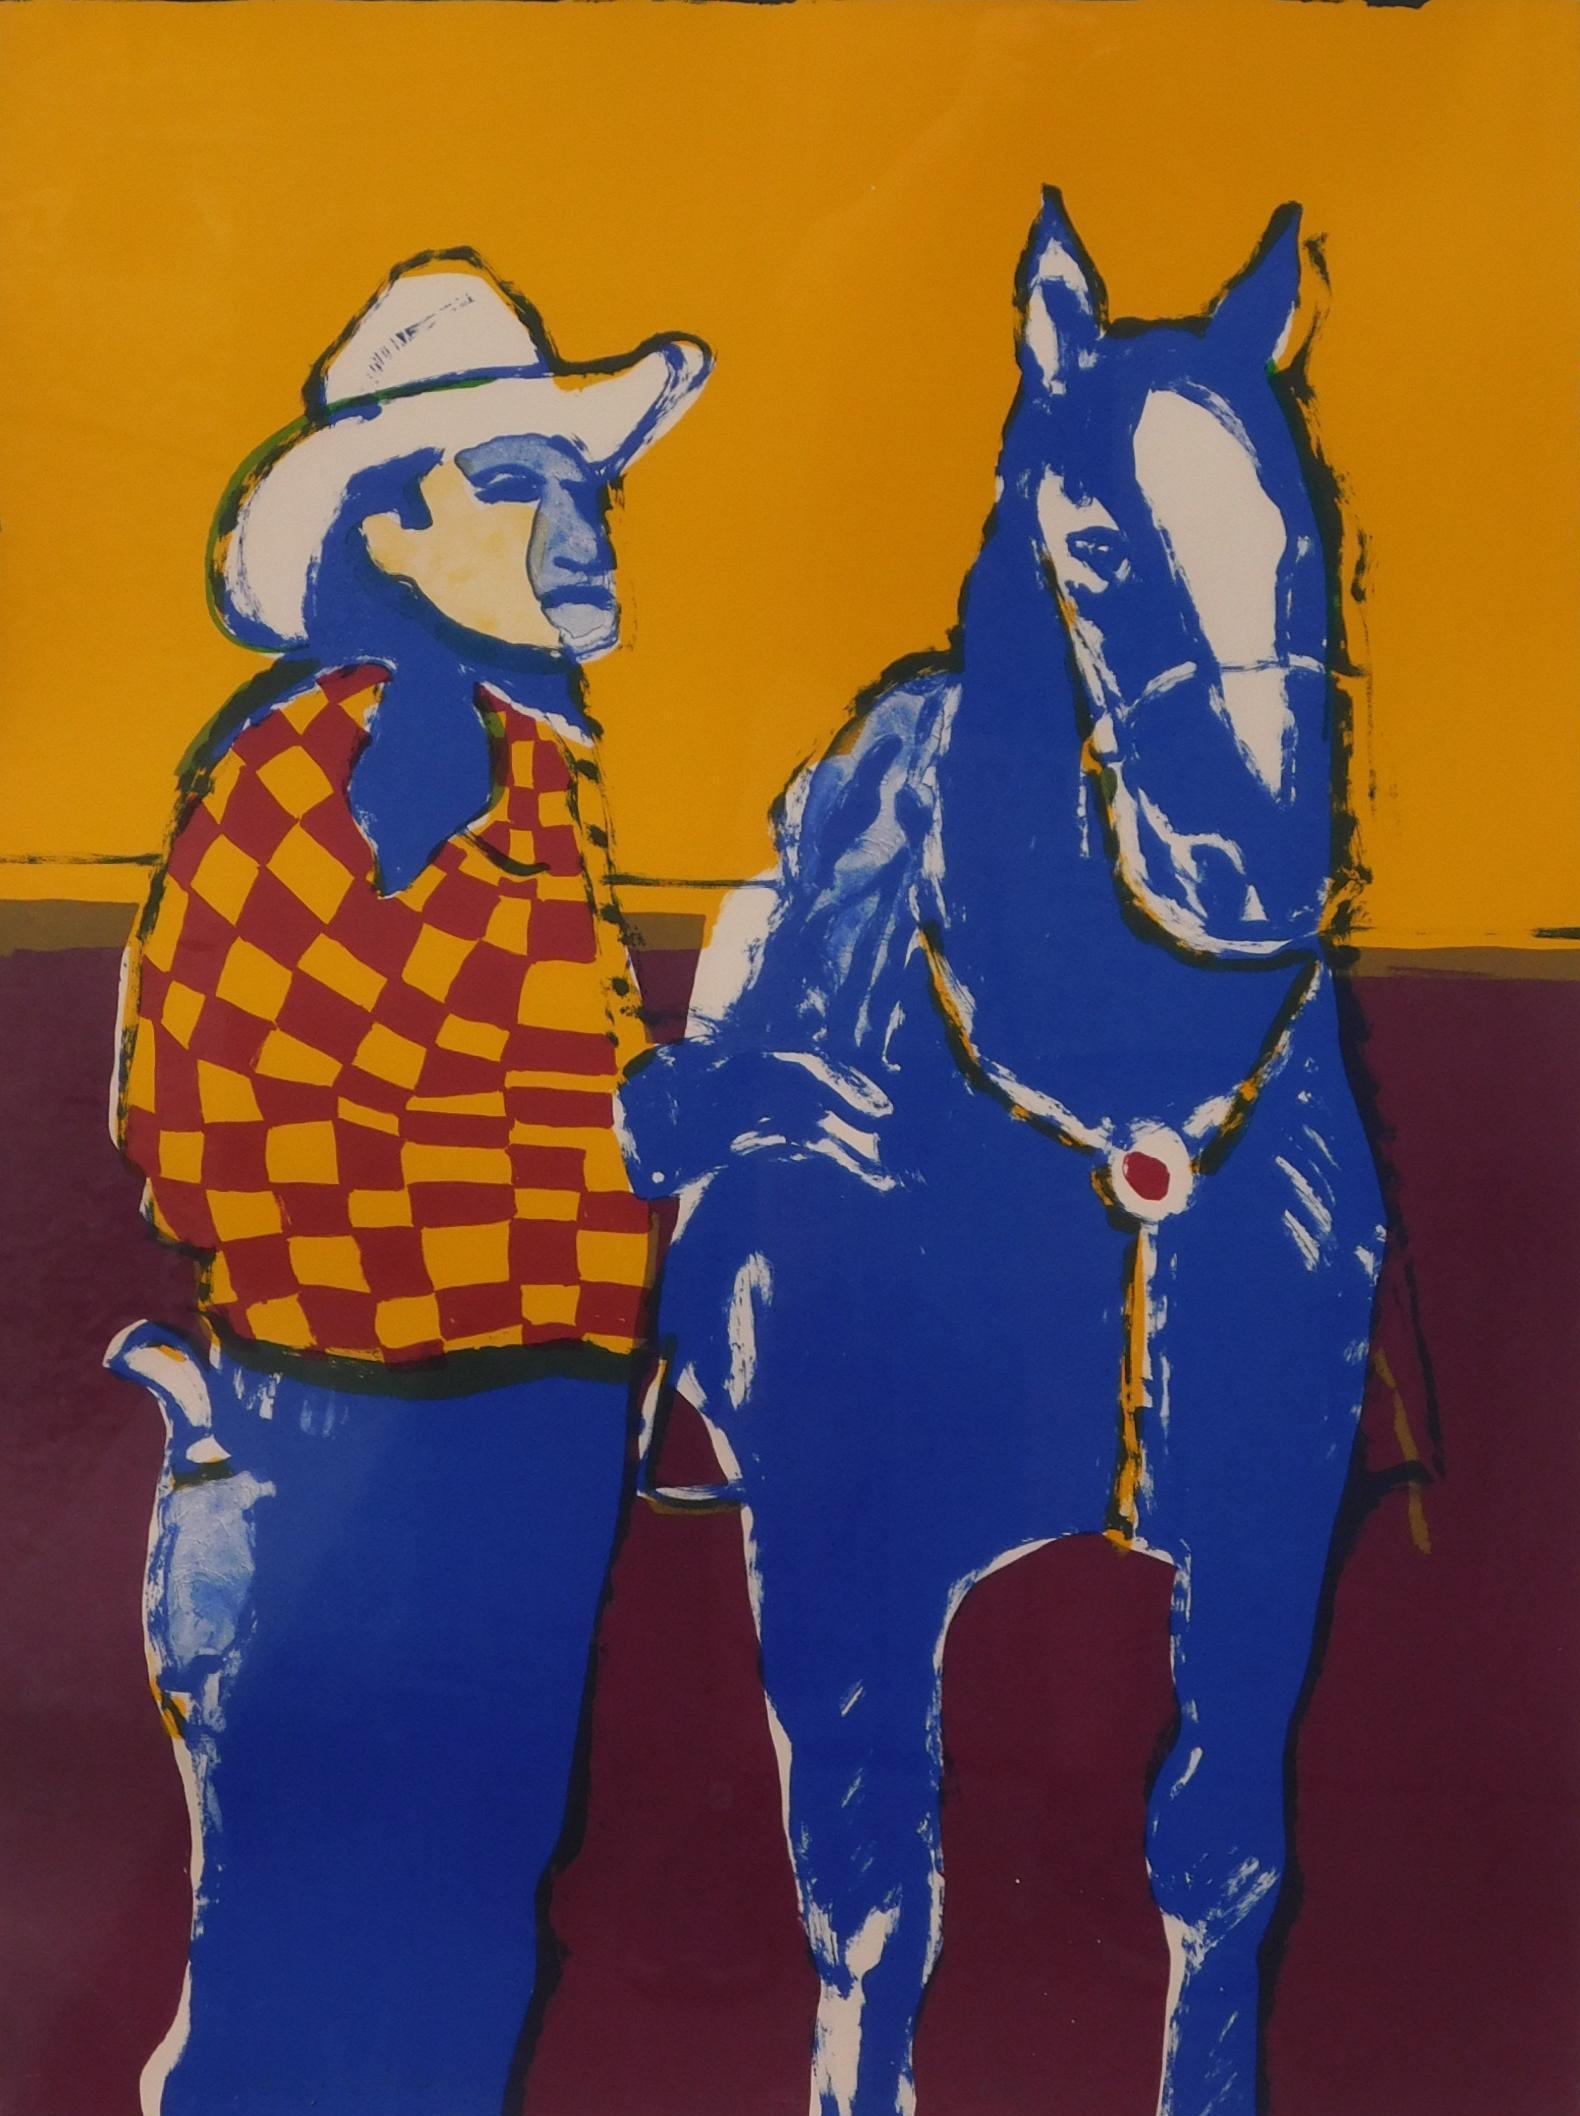 Color Lithograph, 1979. By iconic artist Fritz Scholder (1937-2005). 
Sheet size: 30 x 22. Full margins, deckled edges, unframed and in excellent condition.
Pencil signed lower left by the artist and numbered lower right. Edition size is